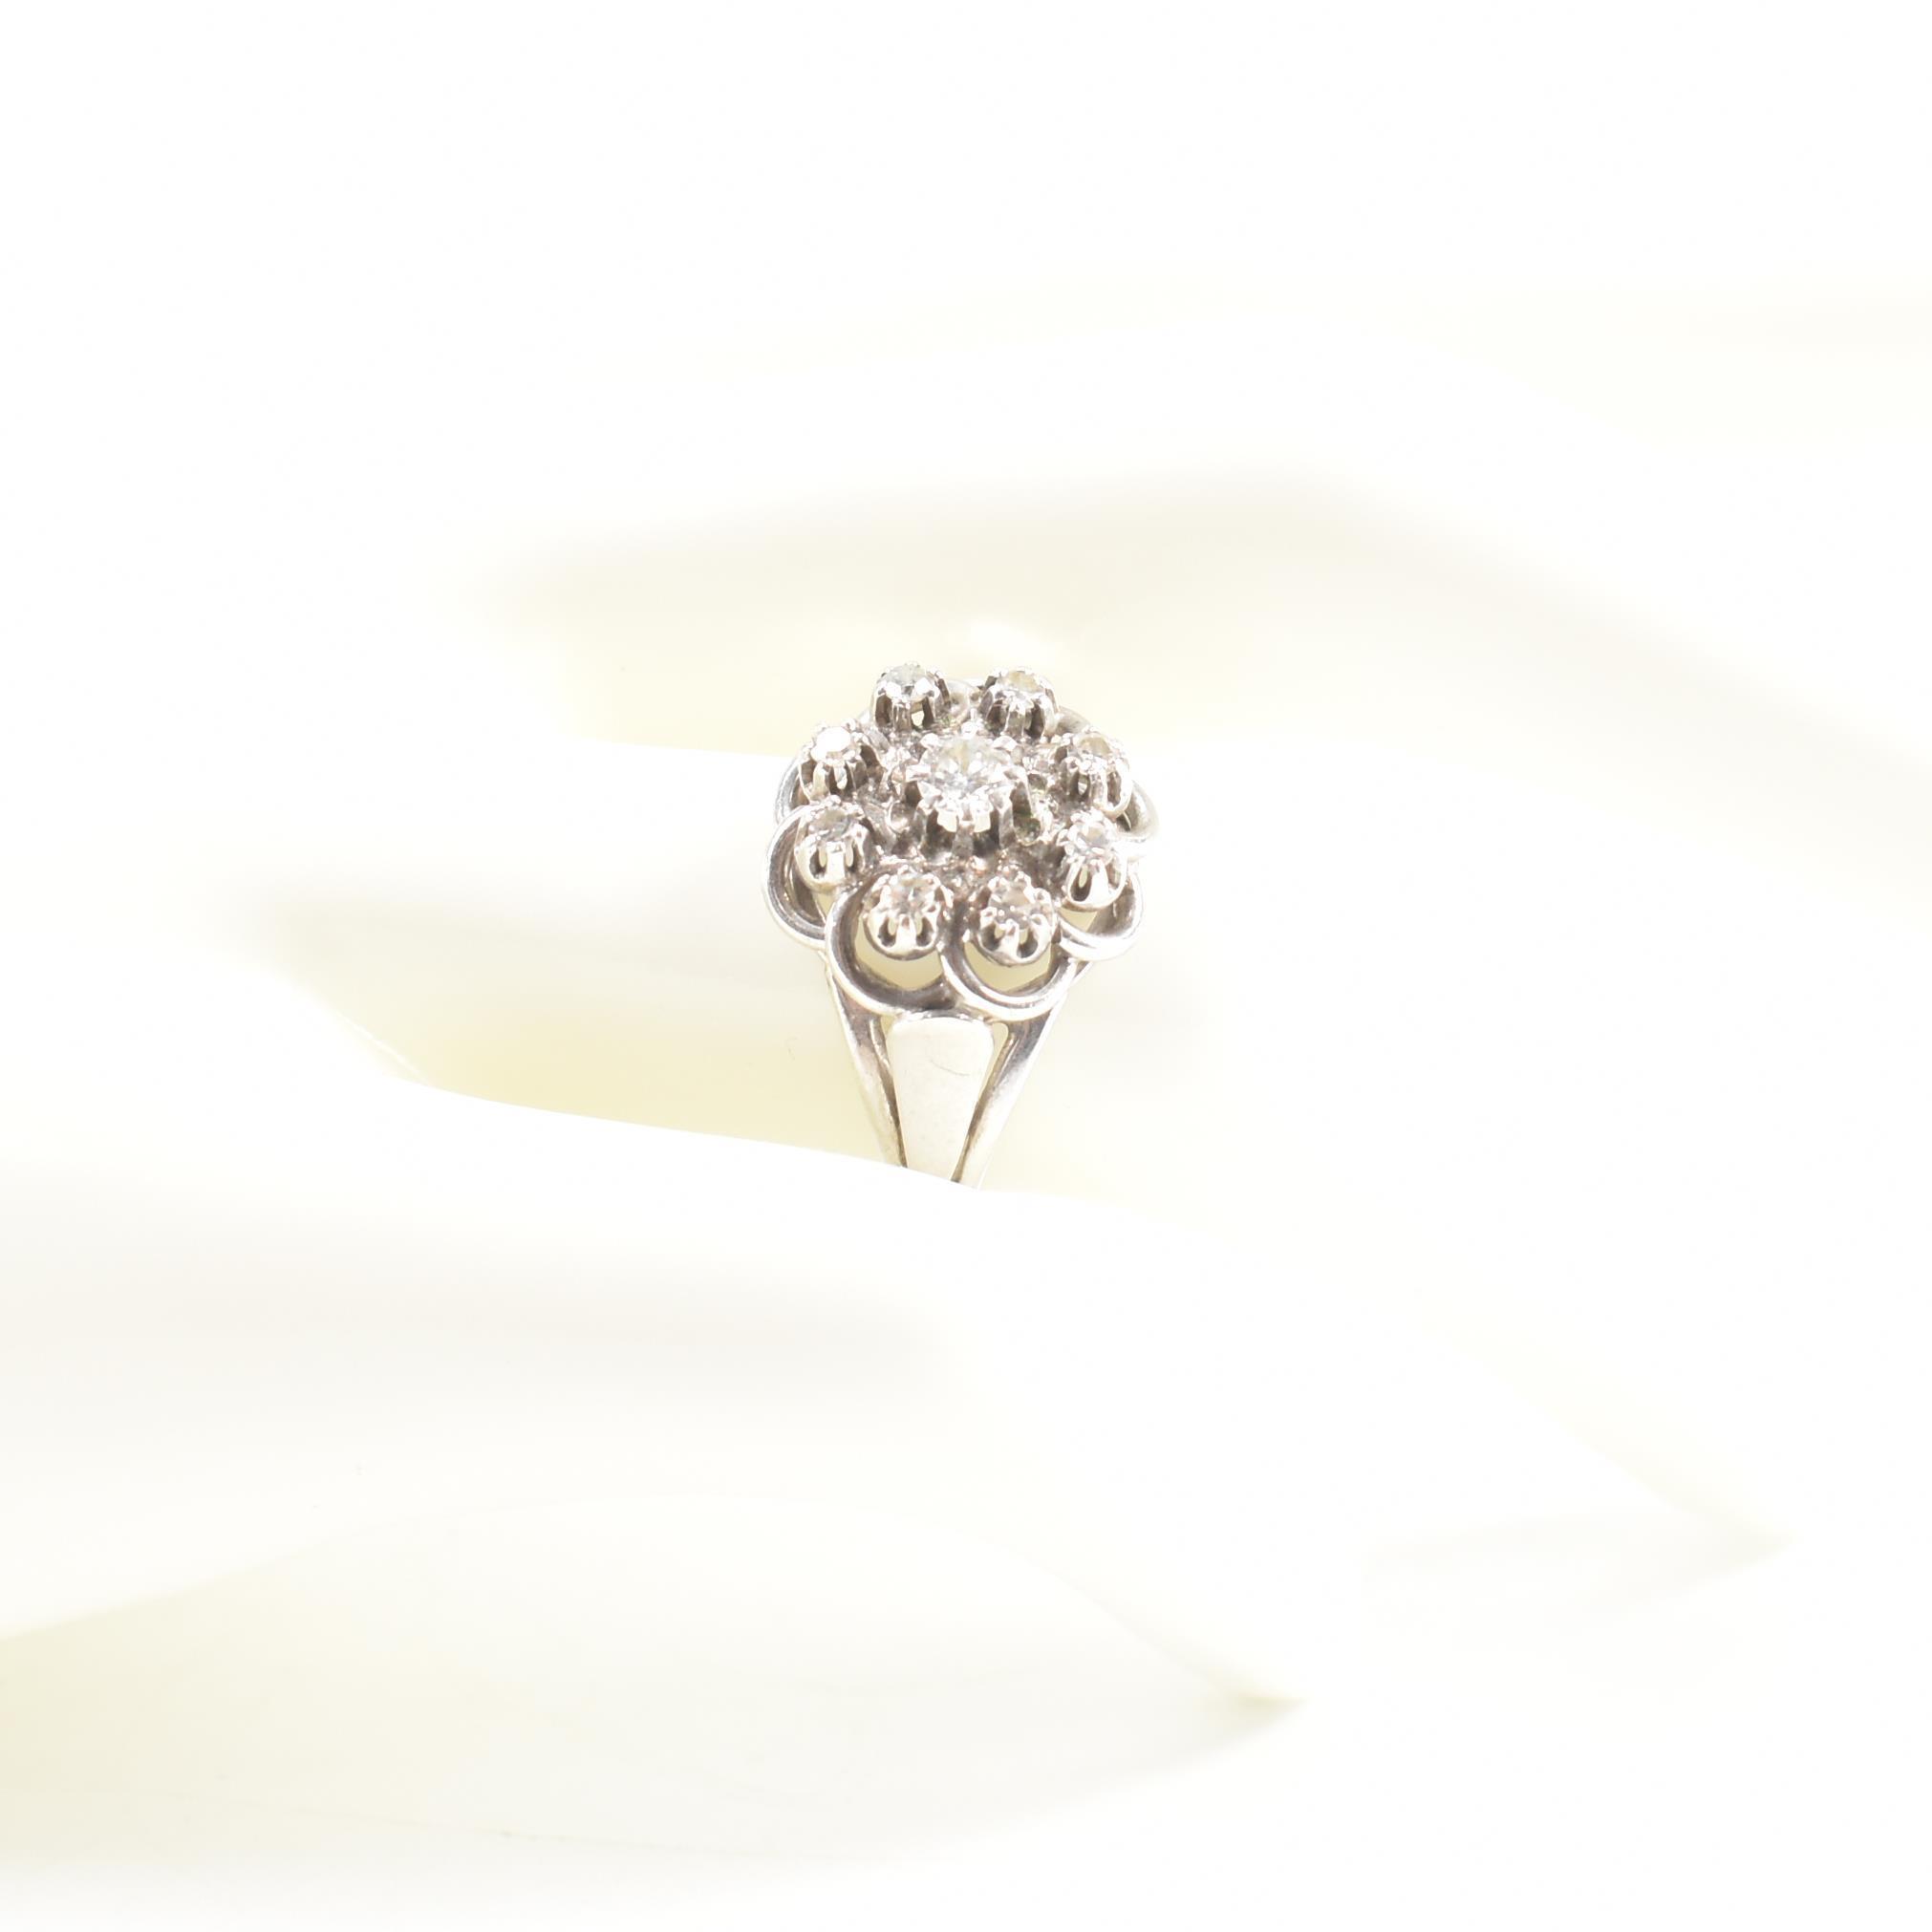 VINTAGE FRENCH 18CT WHITE GOLD & DIAMOND CLUSTER RING - Image 9 of 9